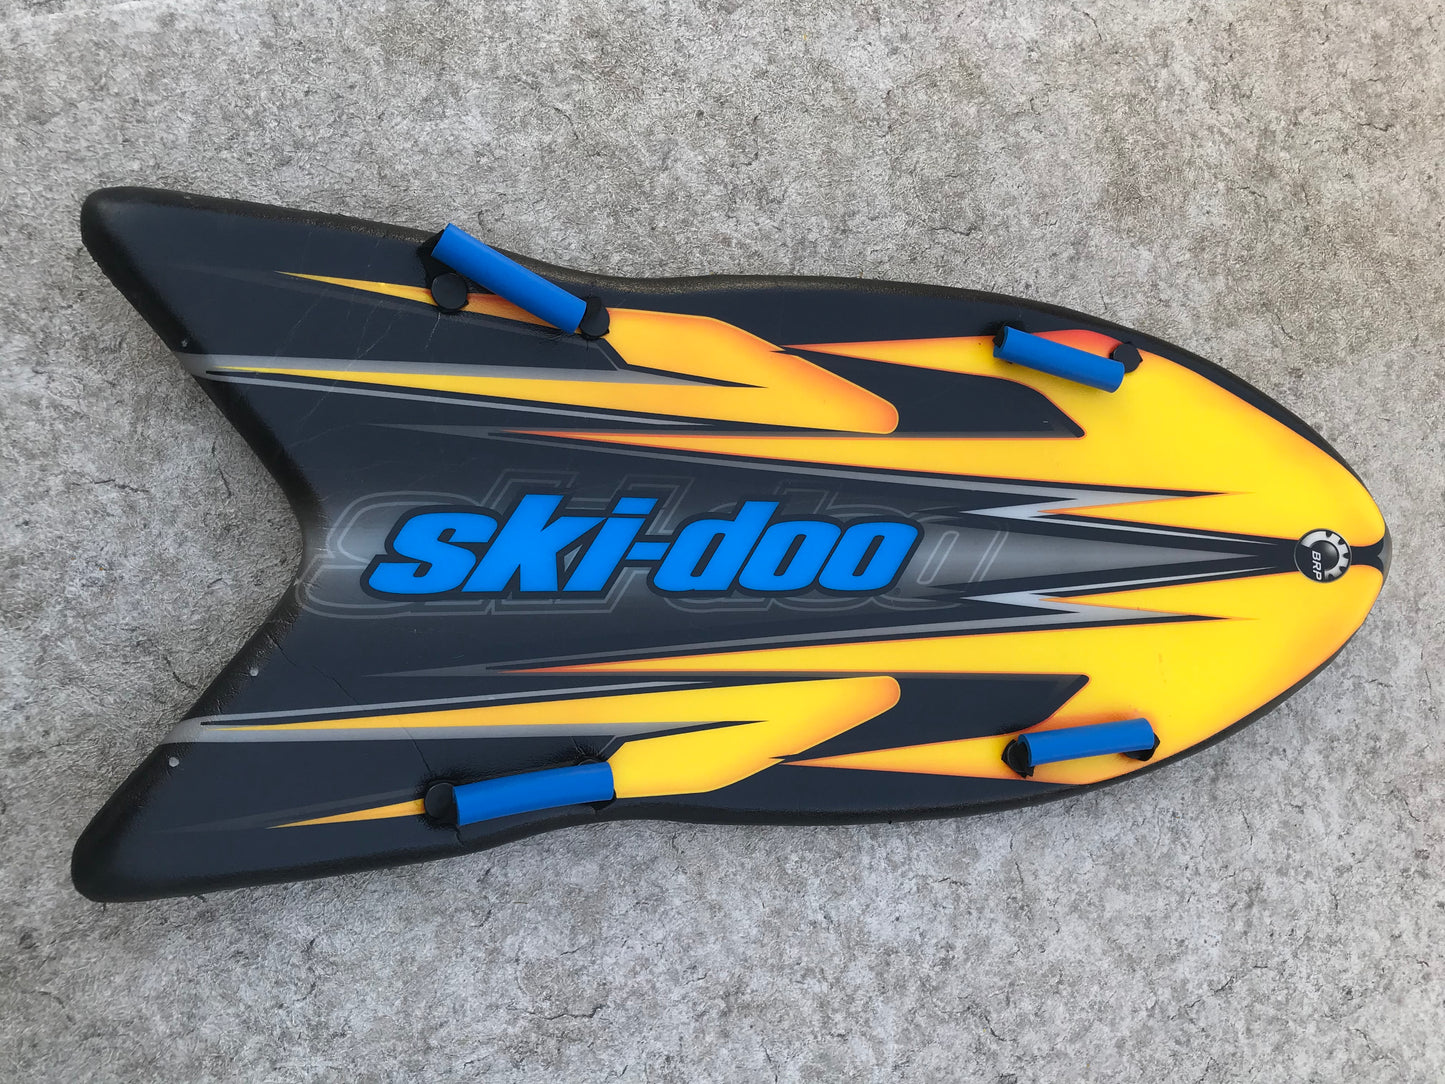 Snow Sled Ski Doo Foam Racing Sled Child Size 4-12 Excellent As New Grey Blue Yellow